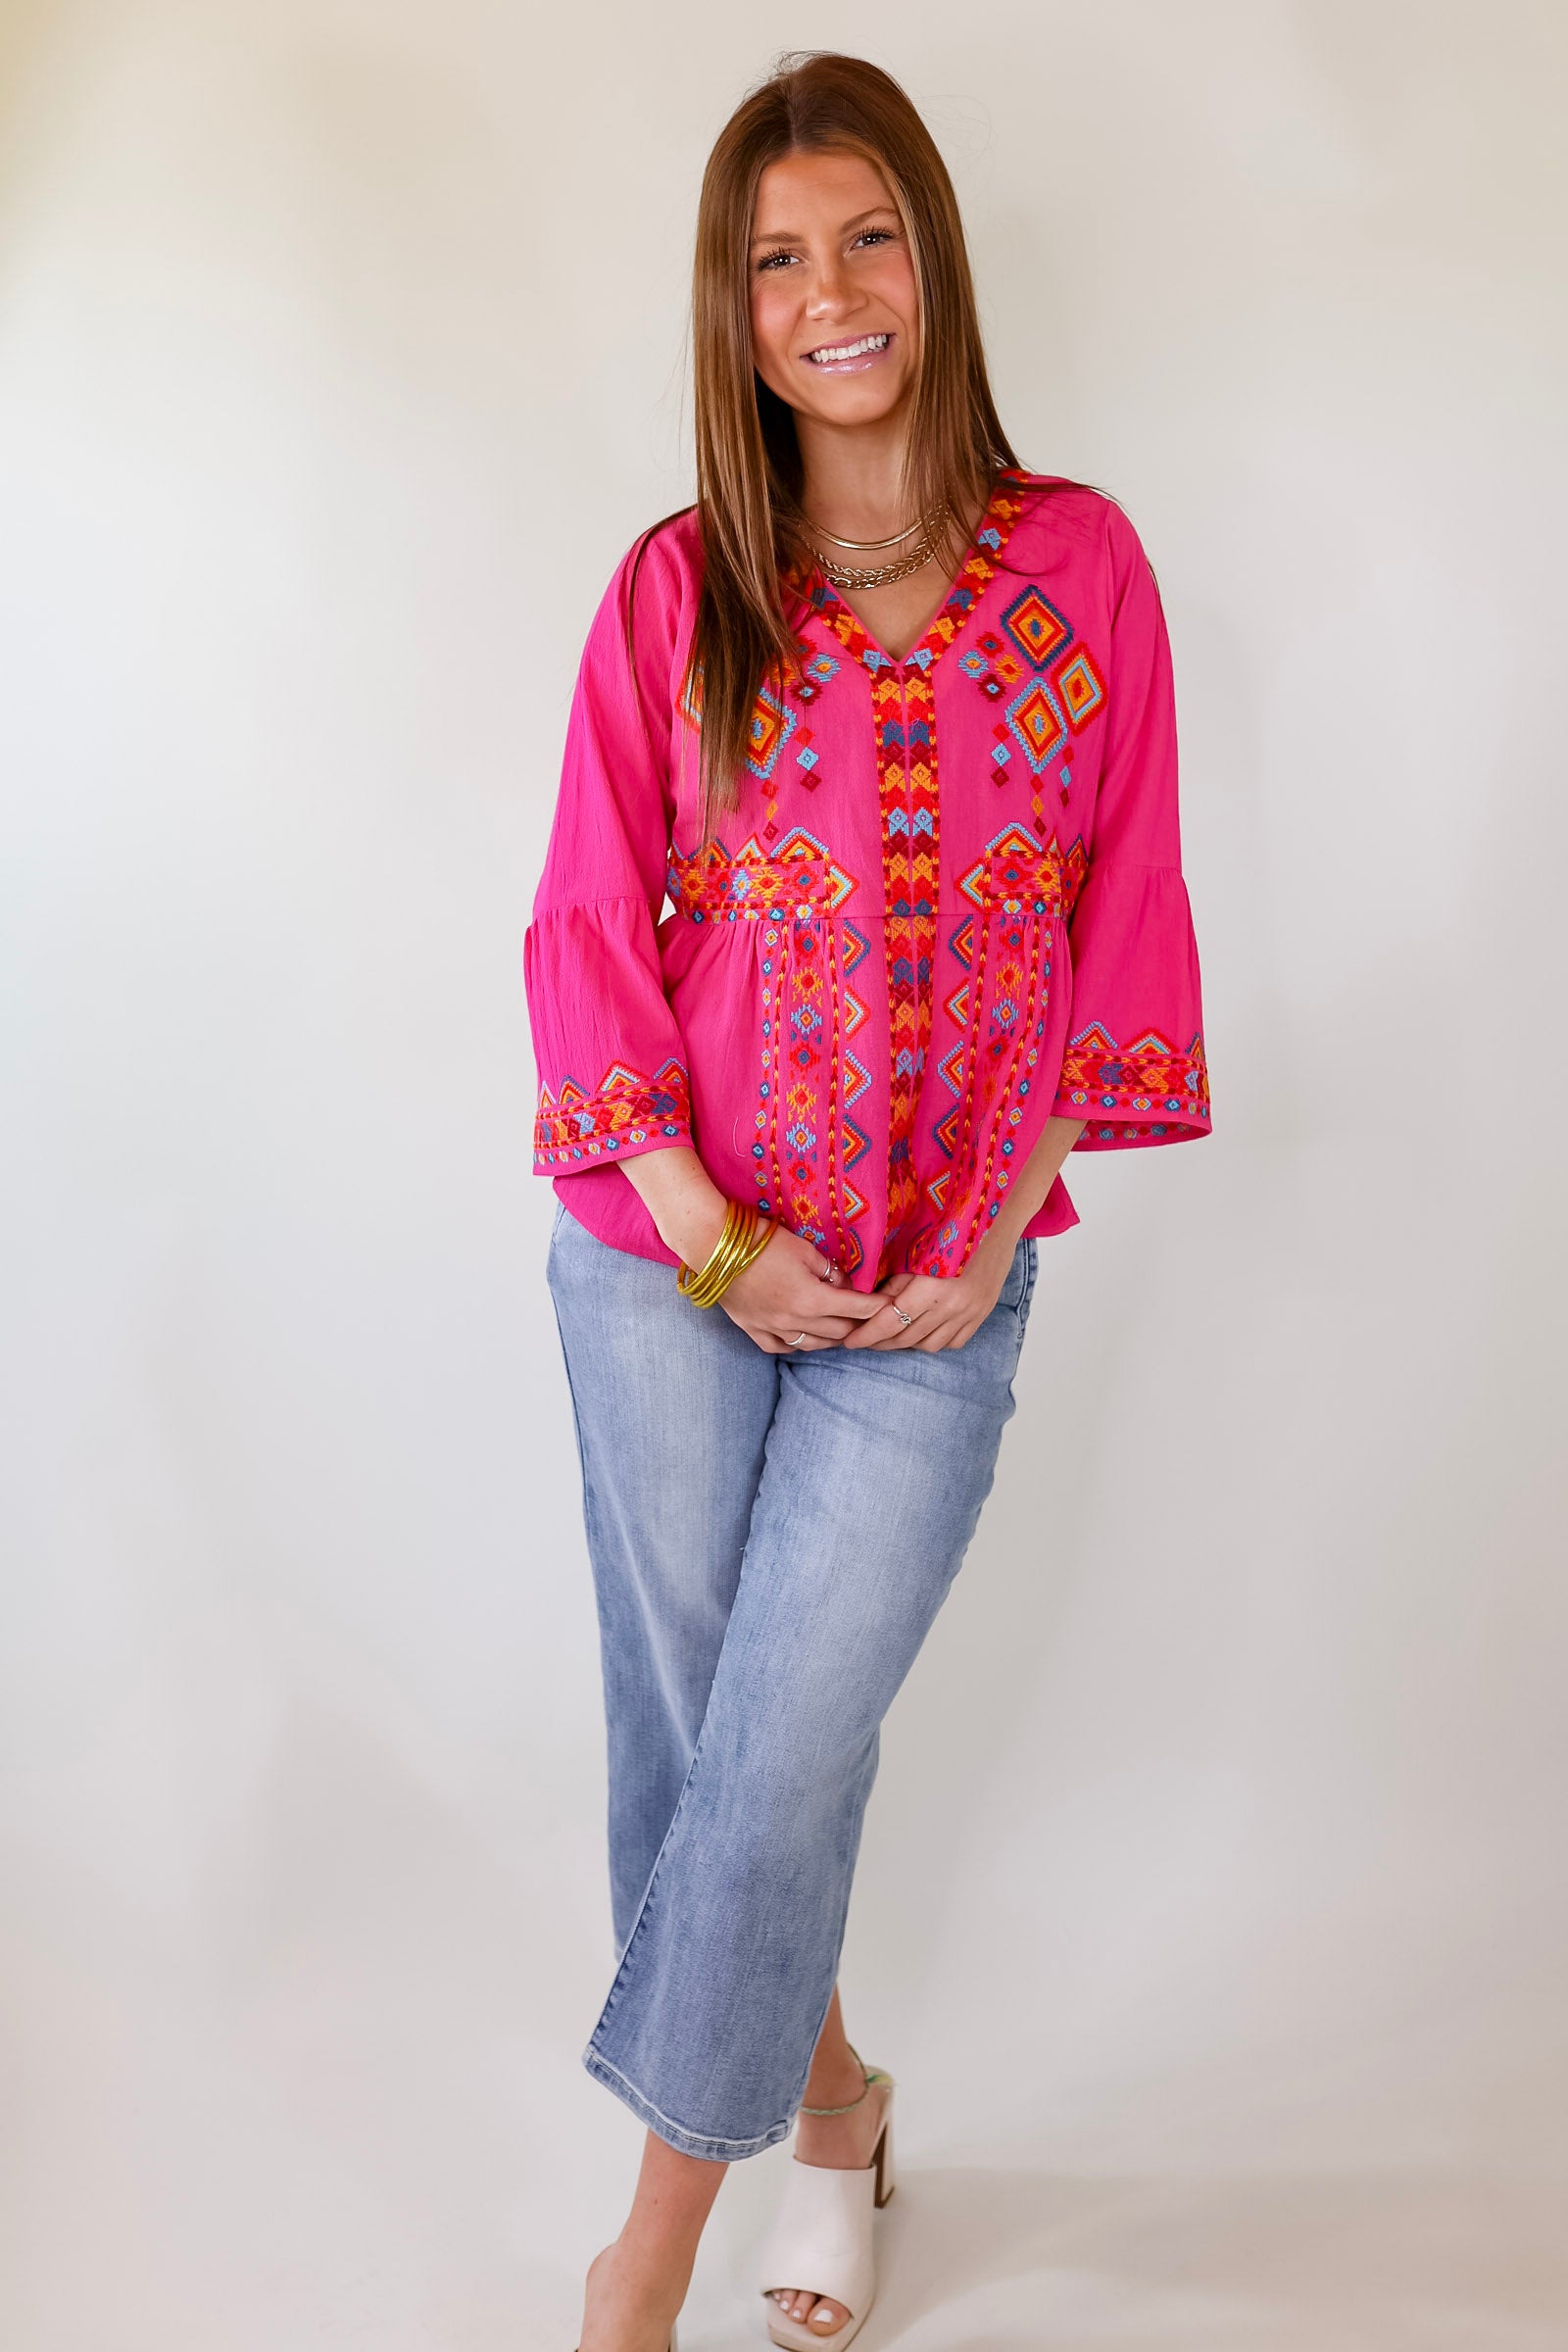 The Party Has Arrived 3/4 Sleeve V Neck Top With Embroidered Tribal Print in Pink